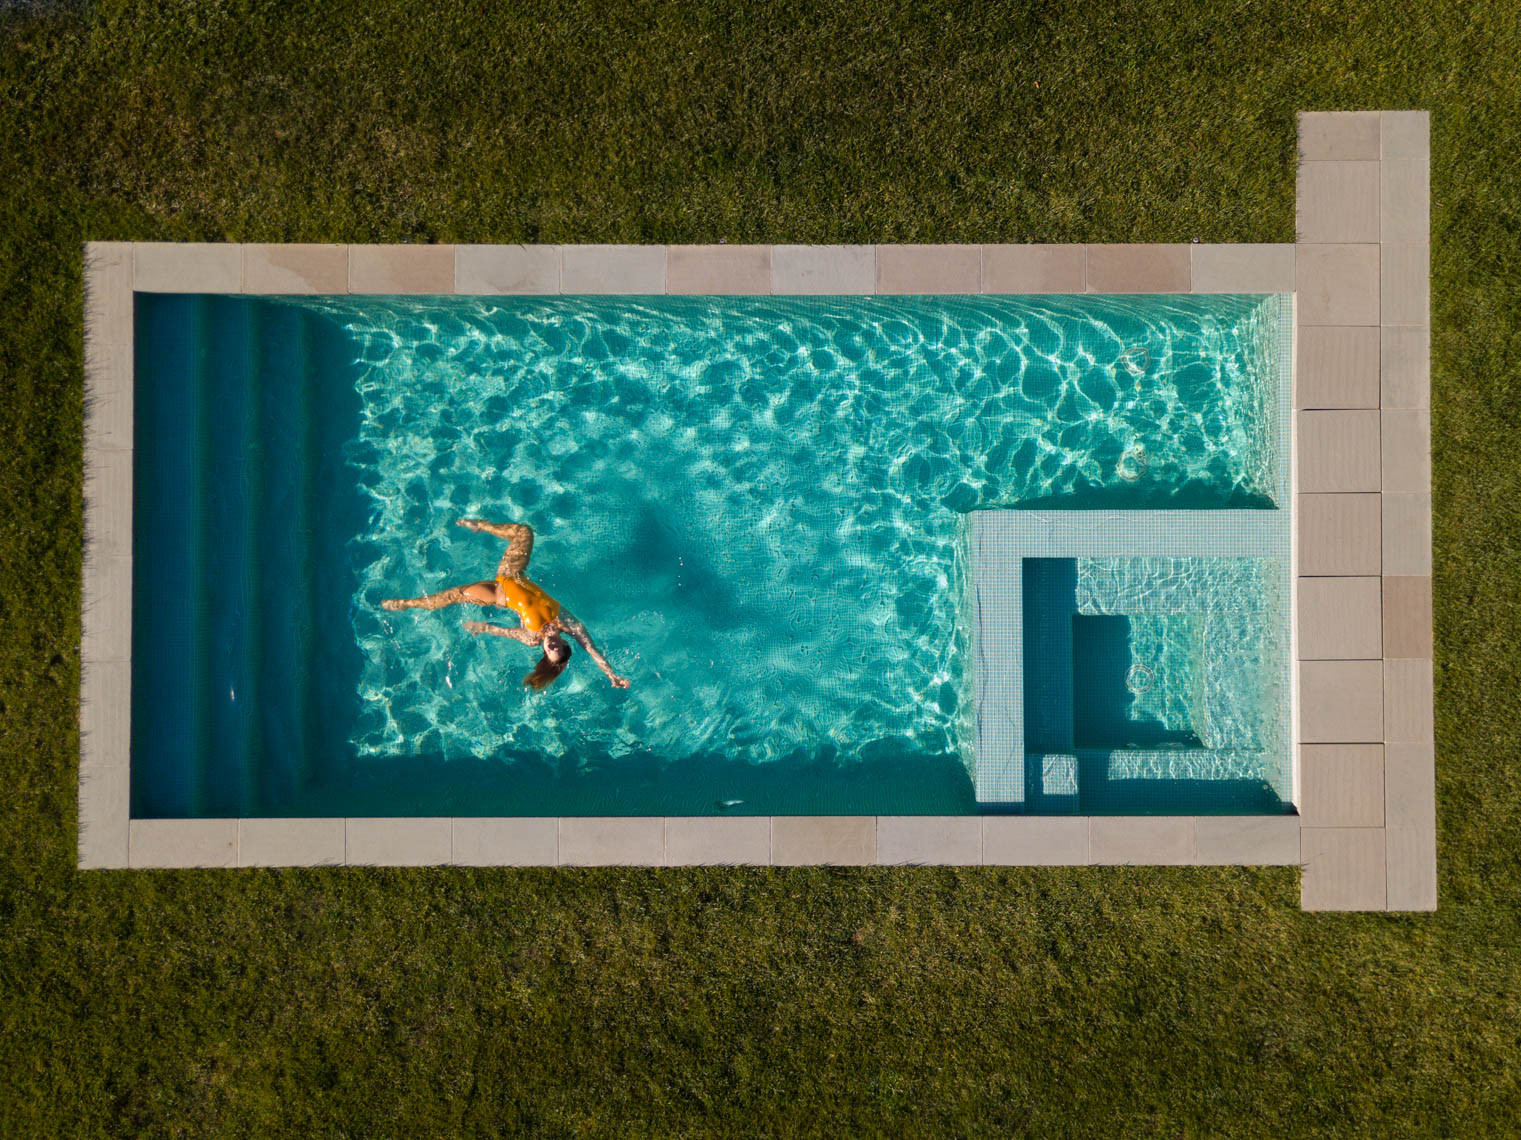 Synchronized swimming pool drone